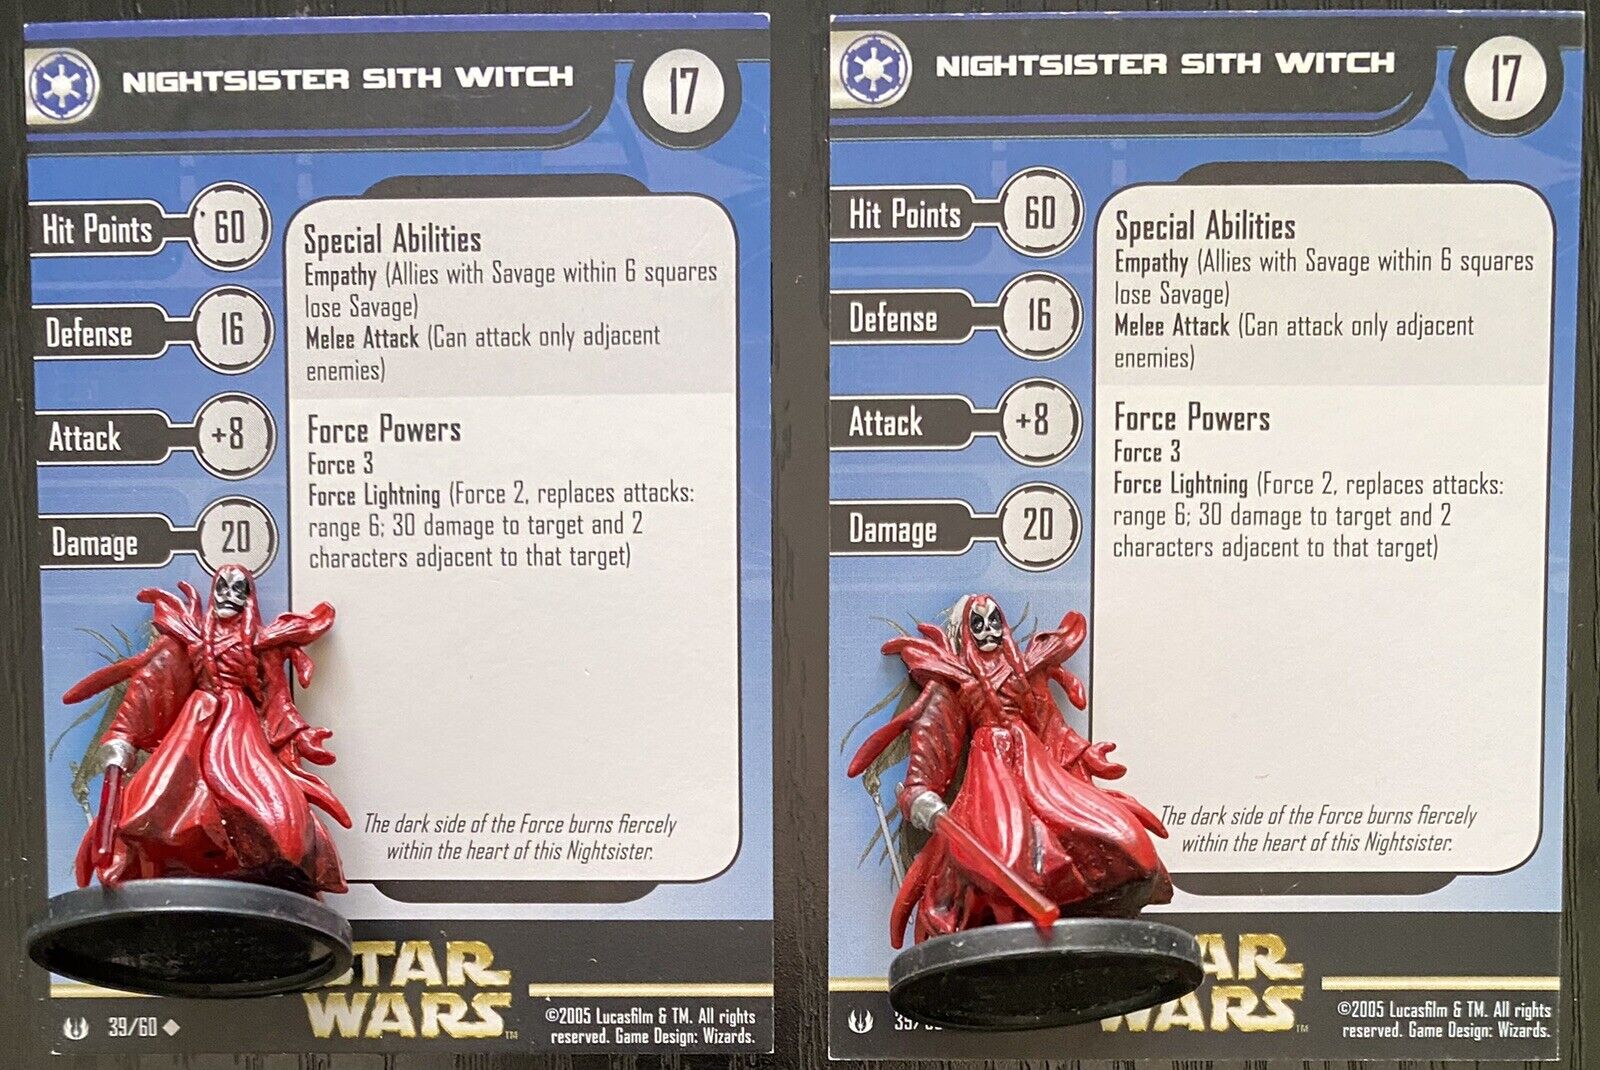 Star Wars Miniatures 2x Nightsister Sith Witch, Universe 39/60 W/ Cards